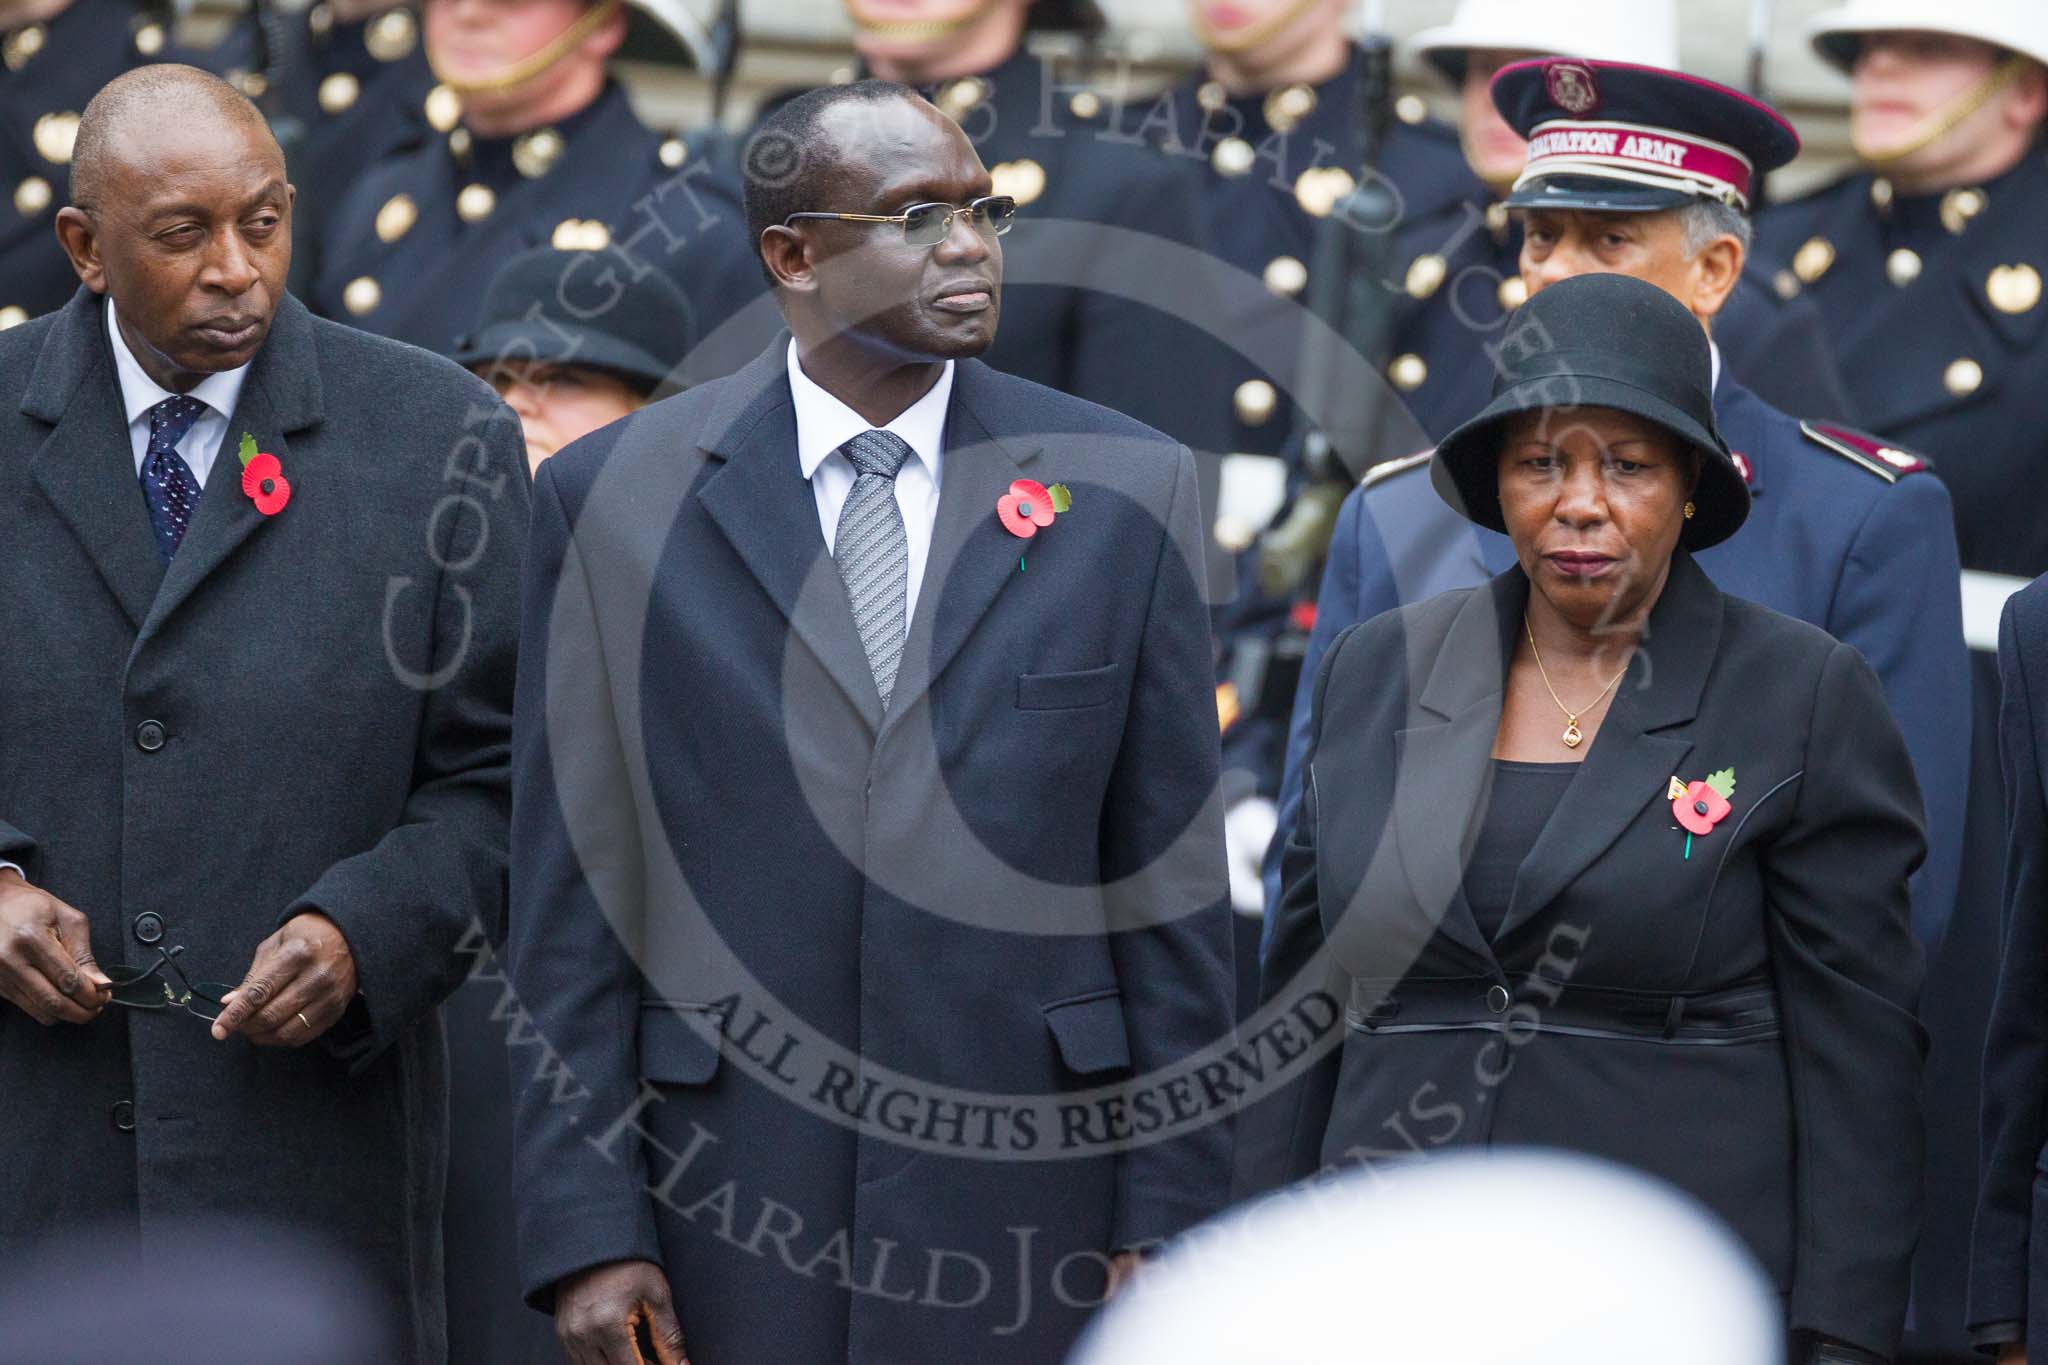 Remembrance Sunday at the Cenotaph 2015: The High Commissioner of Malawi, the High Commissioner of Kenya, and the High Commissioner of Uganda standing the the Cenotaph. Image #315, 08 November 2015 11:19 Whitehall, London, UK